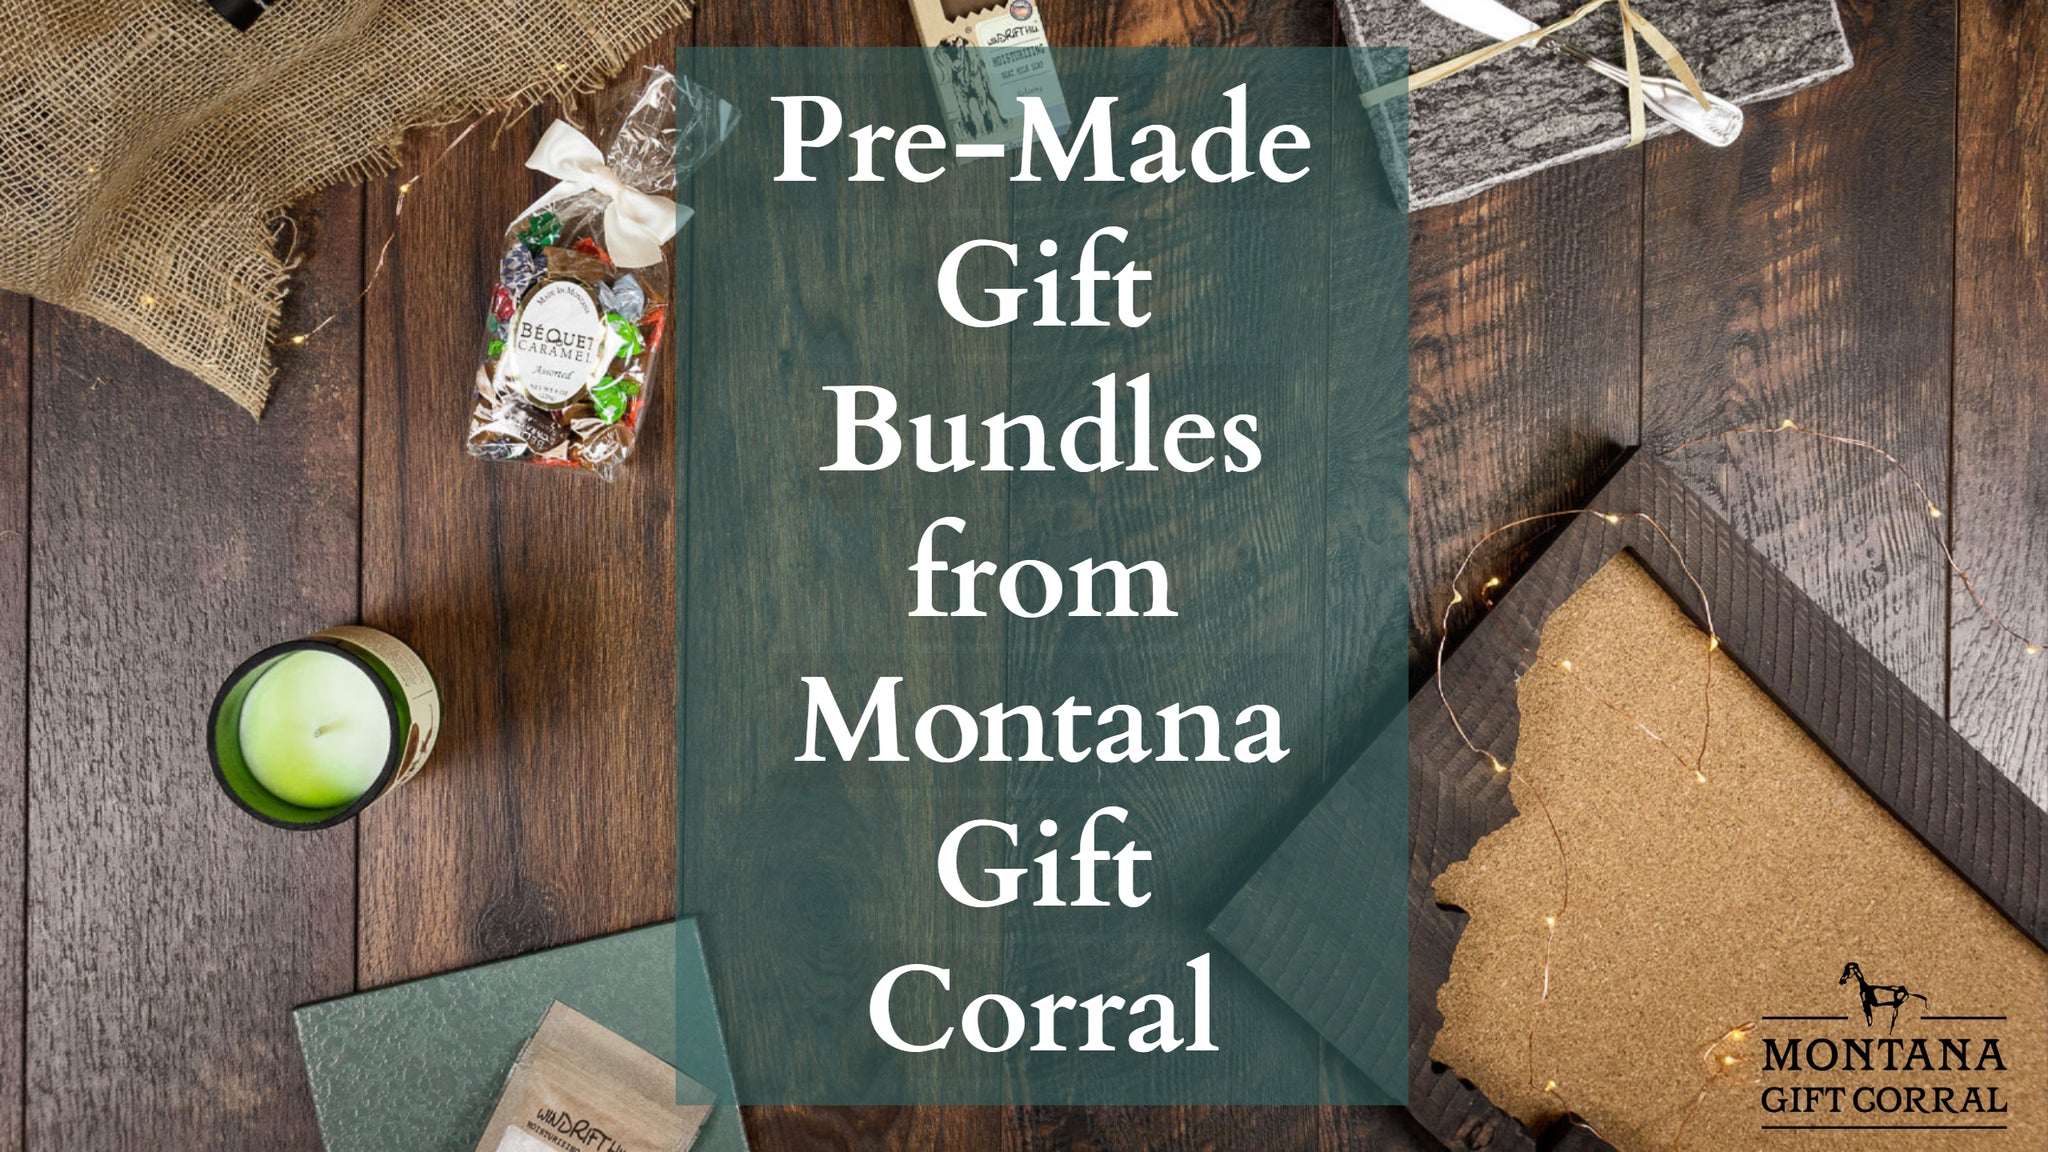 Pre-Made Gift Baskets from Montana Gift Corral